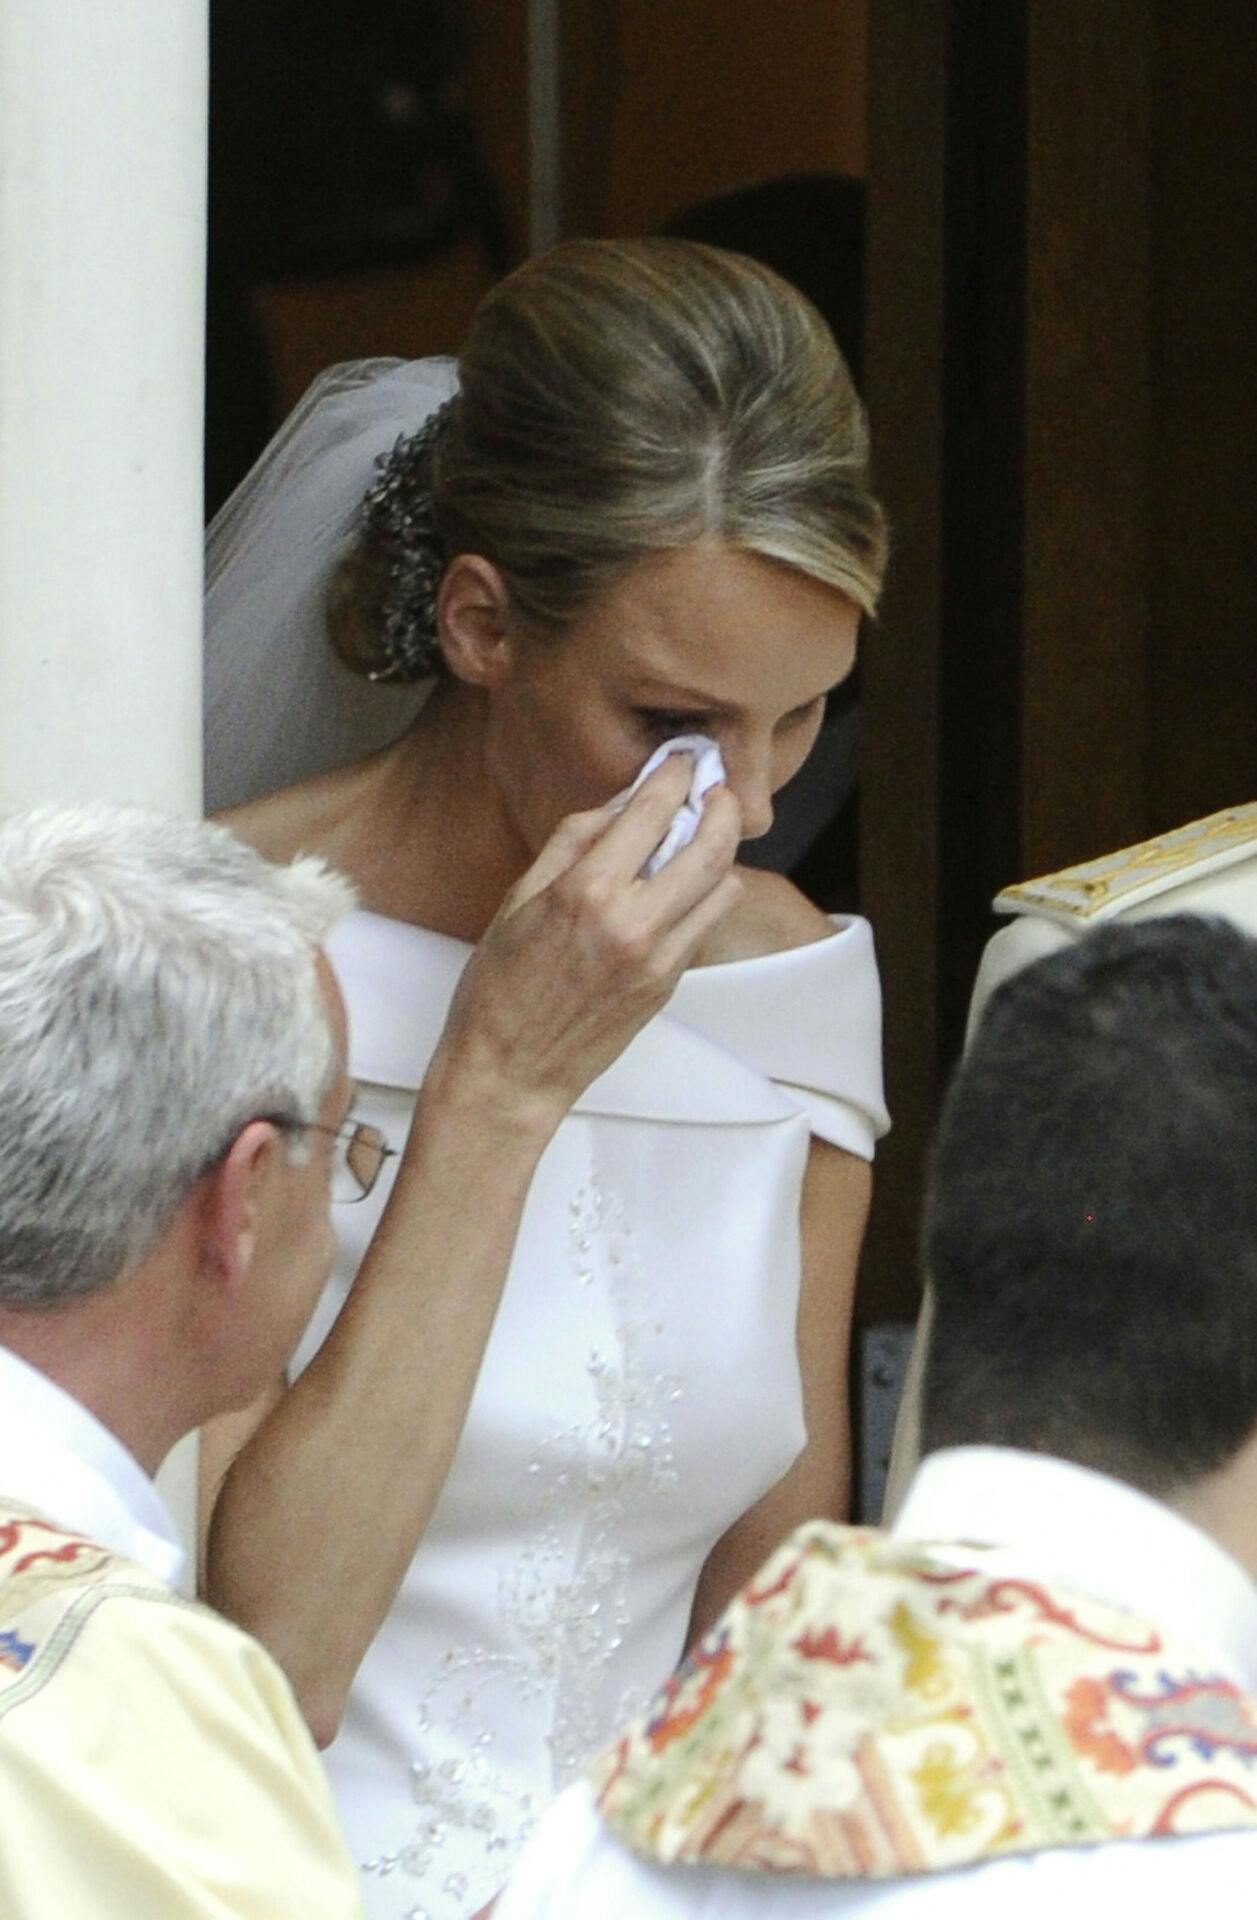 Princess Charlene of Monaco wipes a tear as she leaves with her husband Prince Albert II of Monaco after laying the bride's bouquet at the Sainte Devote's Church following their religious wedding on July 2, 2011 in Monaco. AFP PHOTO / MIGUEL MEDINA